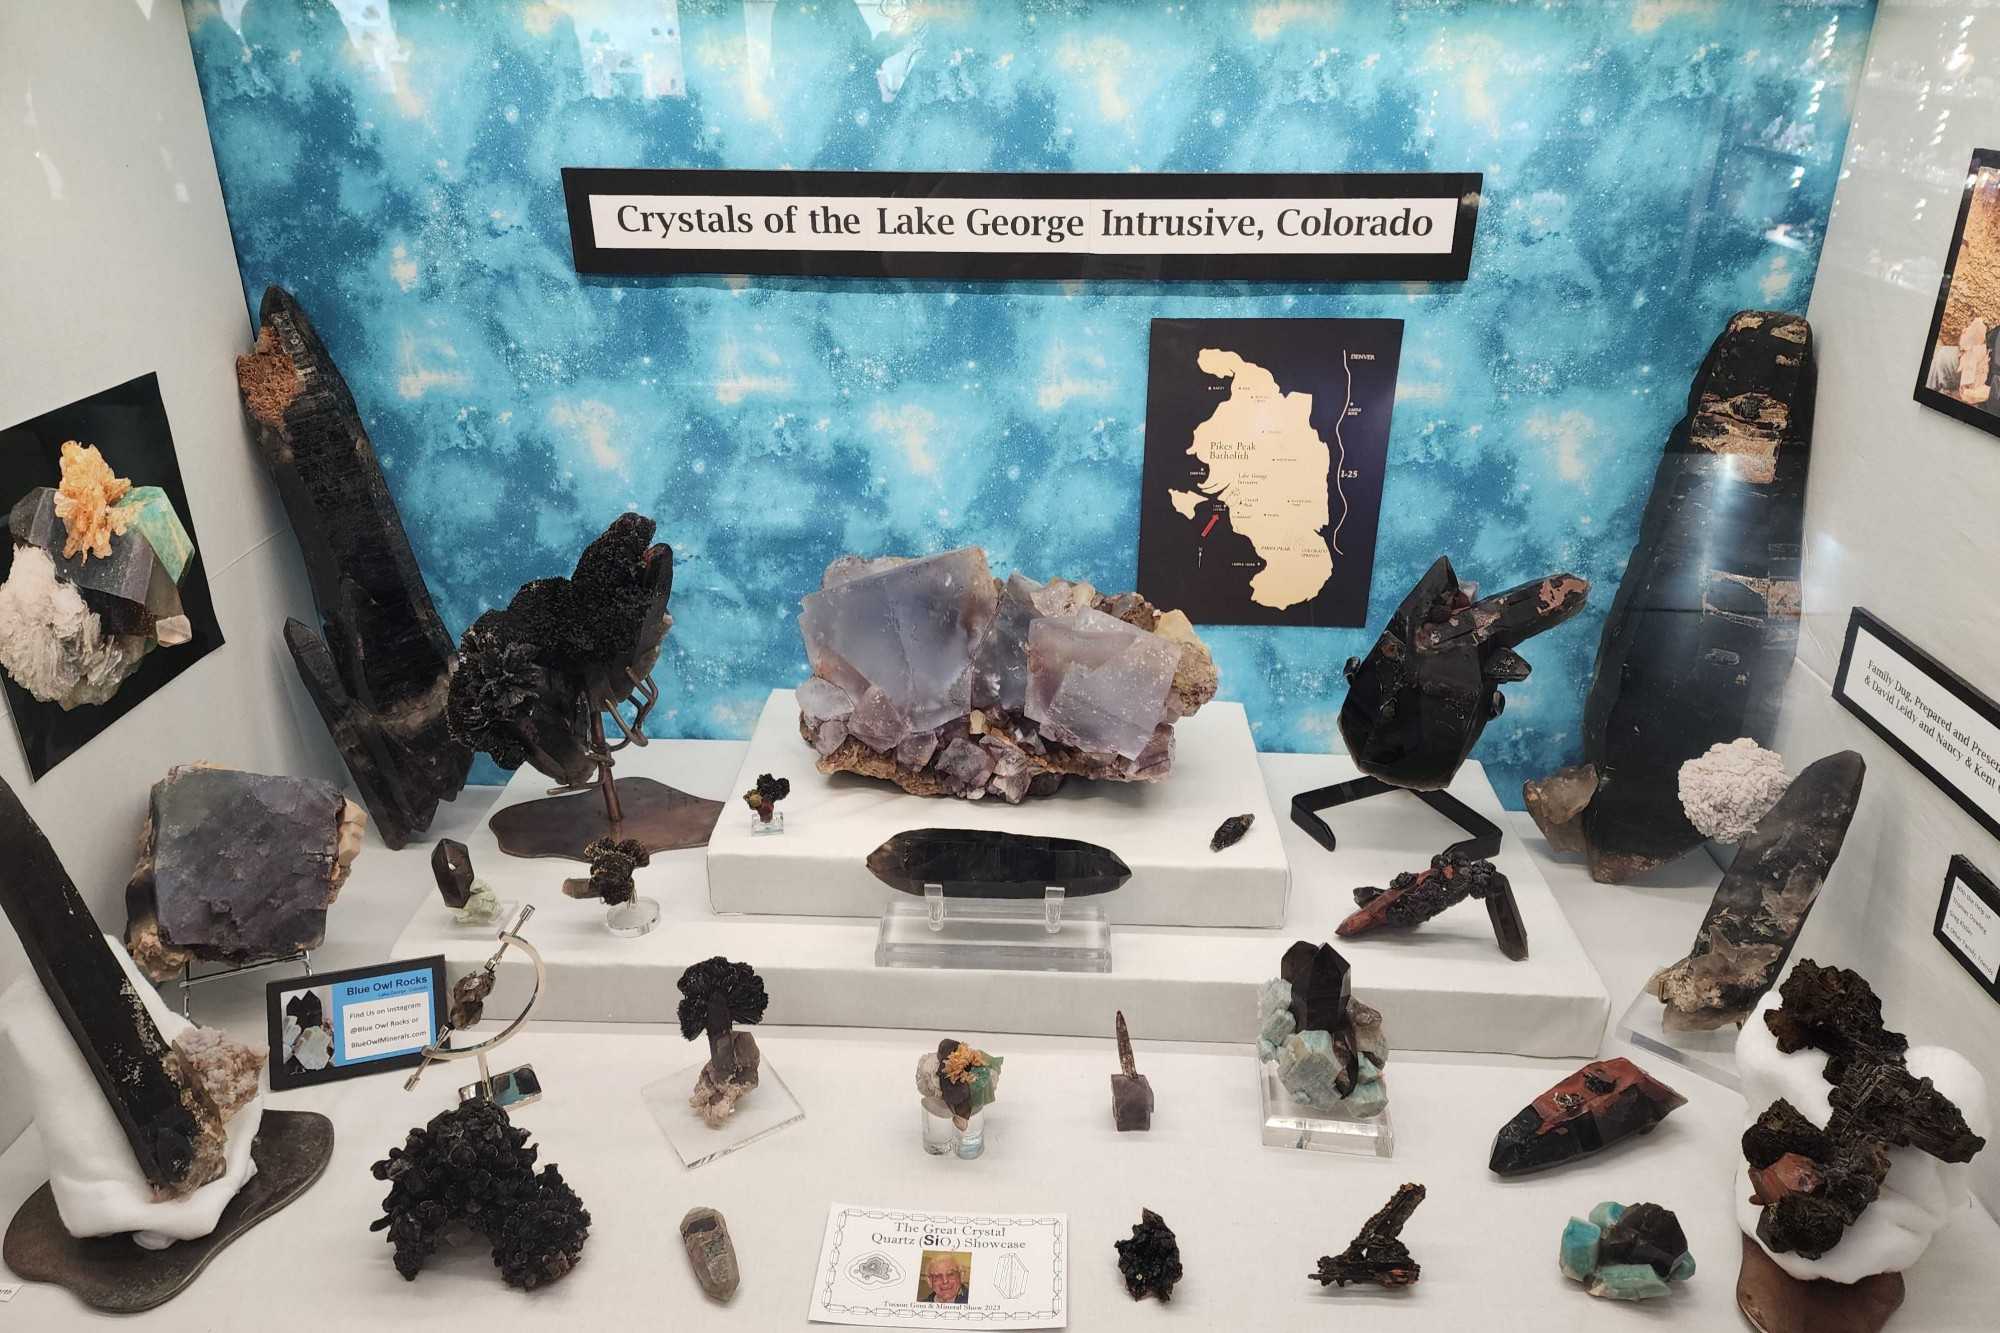 The 68th annual Tucson Gem & Mineral Show took place at the Tucson Convention Center from Feb. 9-12. This year, the theme was “SILICA: Agates and Opals and Quartz, Oh My!”